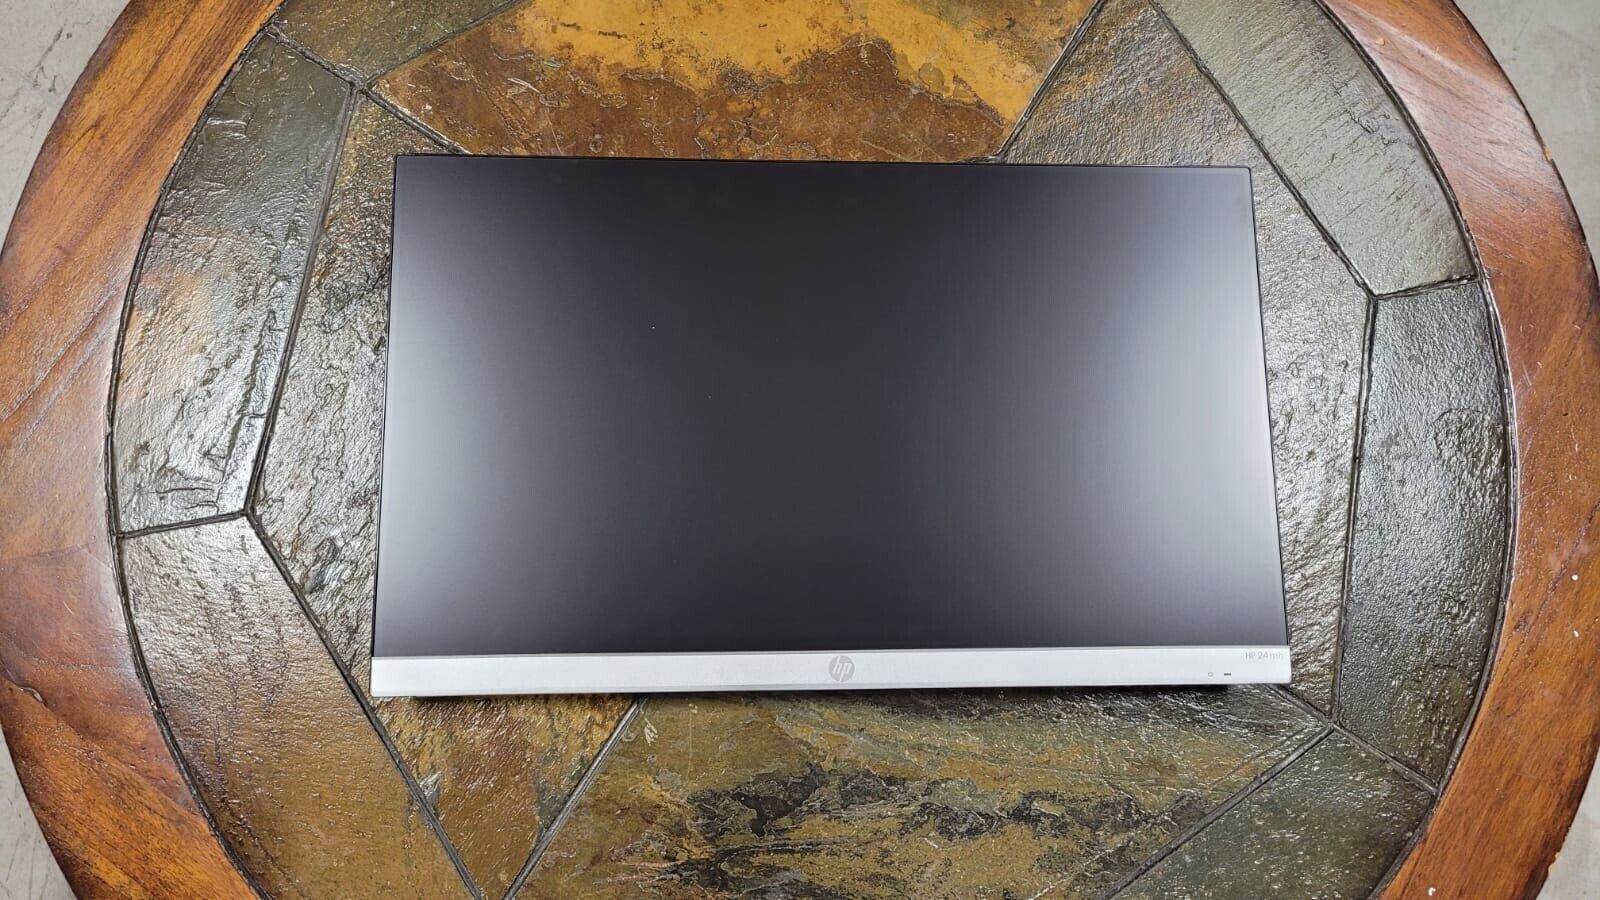 HP 24mh FHD Monitor - Computer Monitor with 23.8-inch IPS Display (1080p)